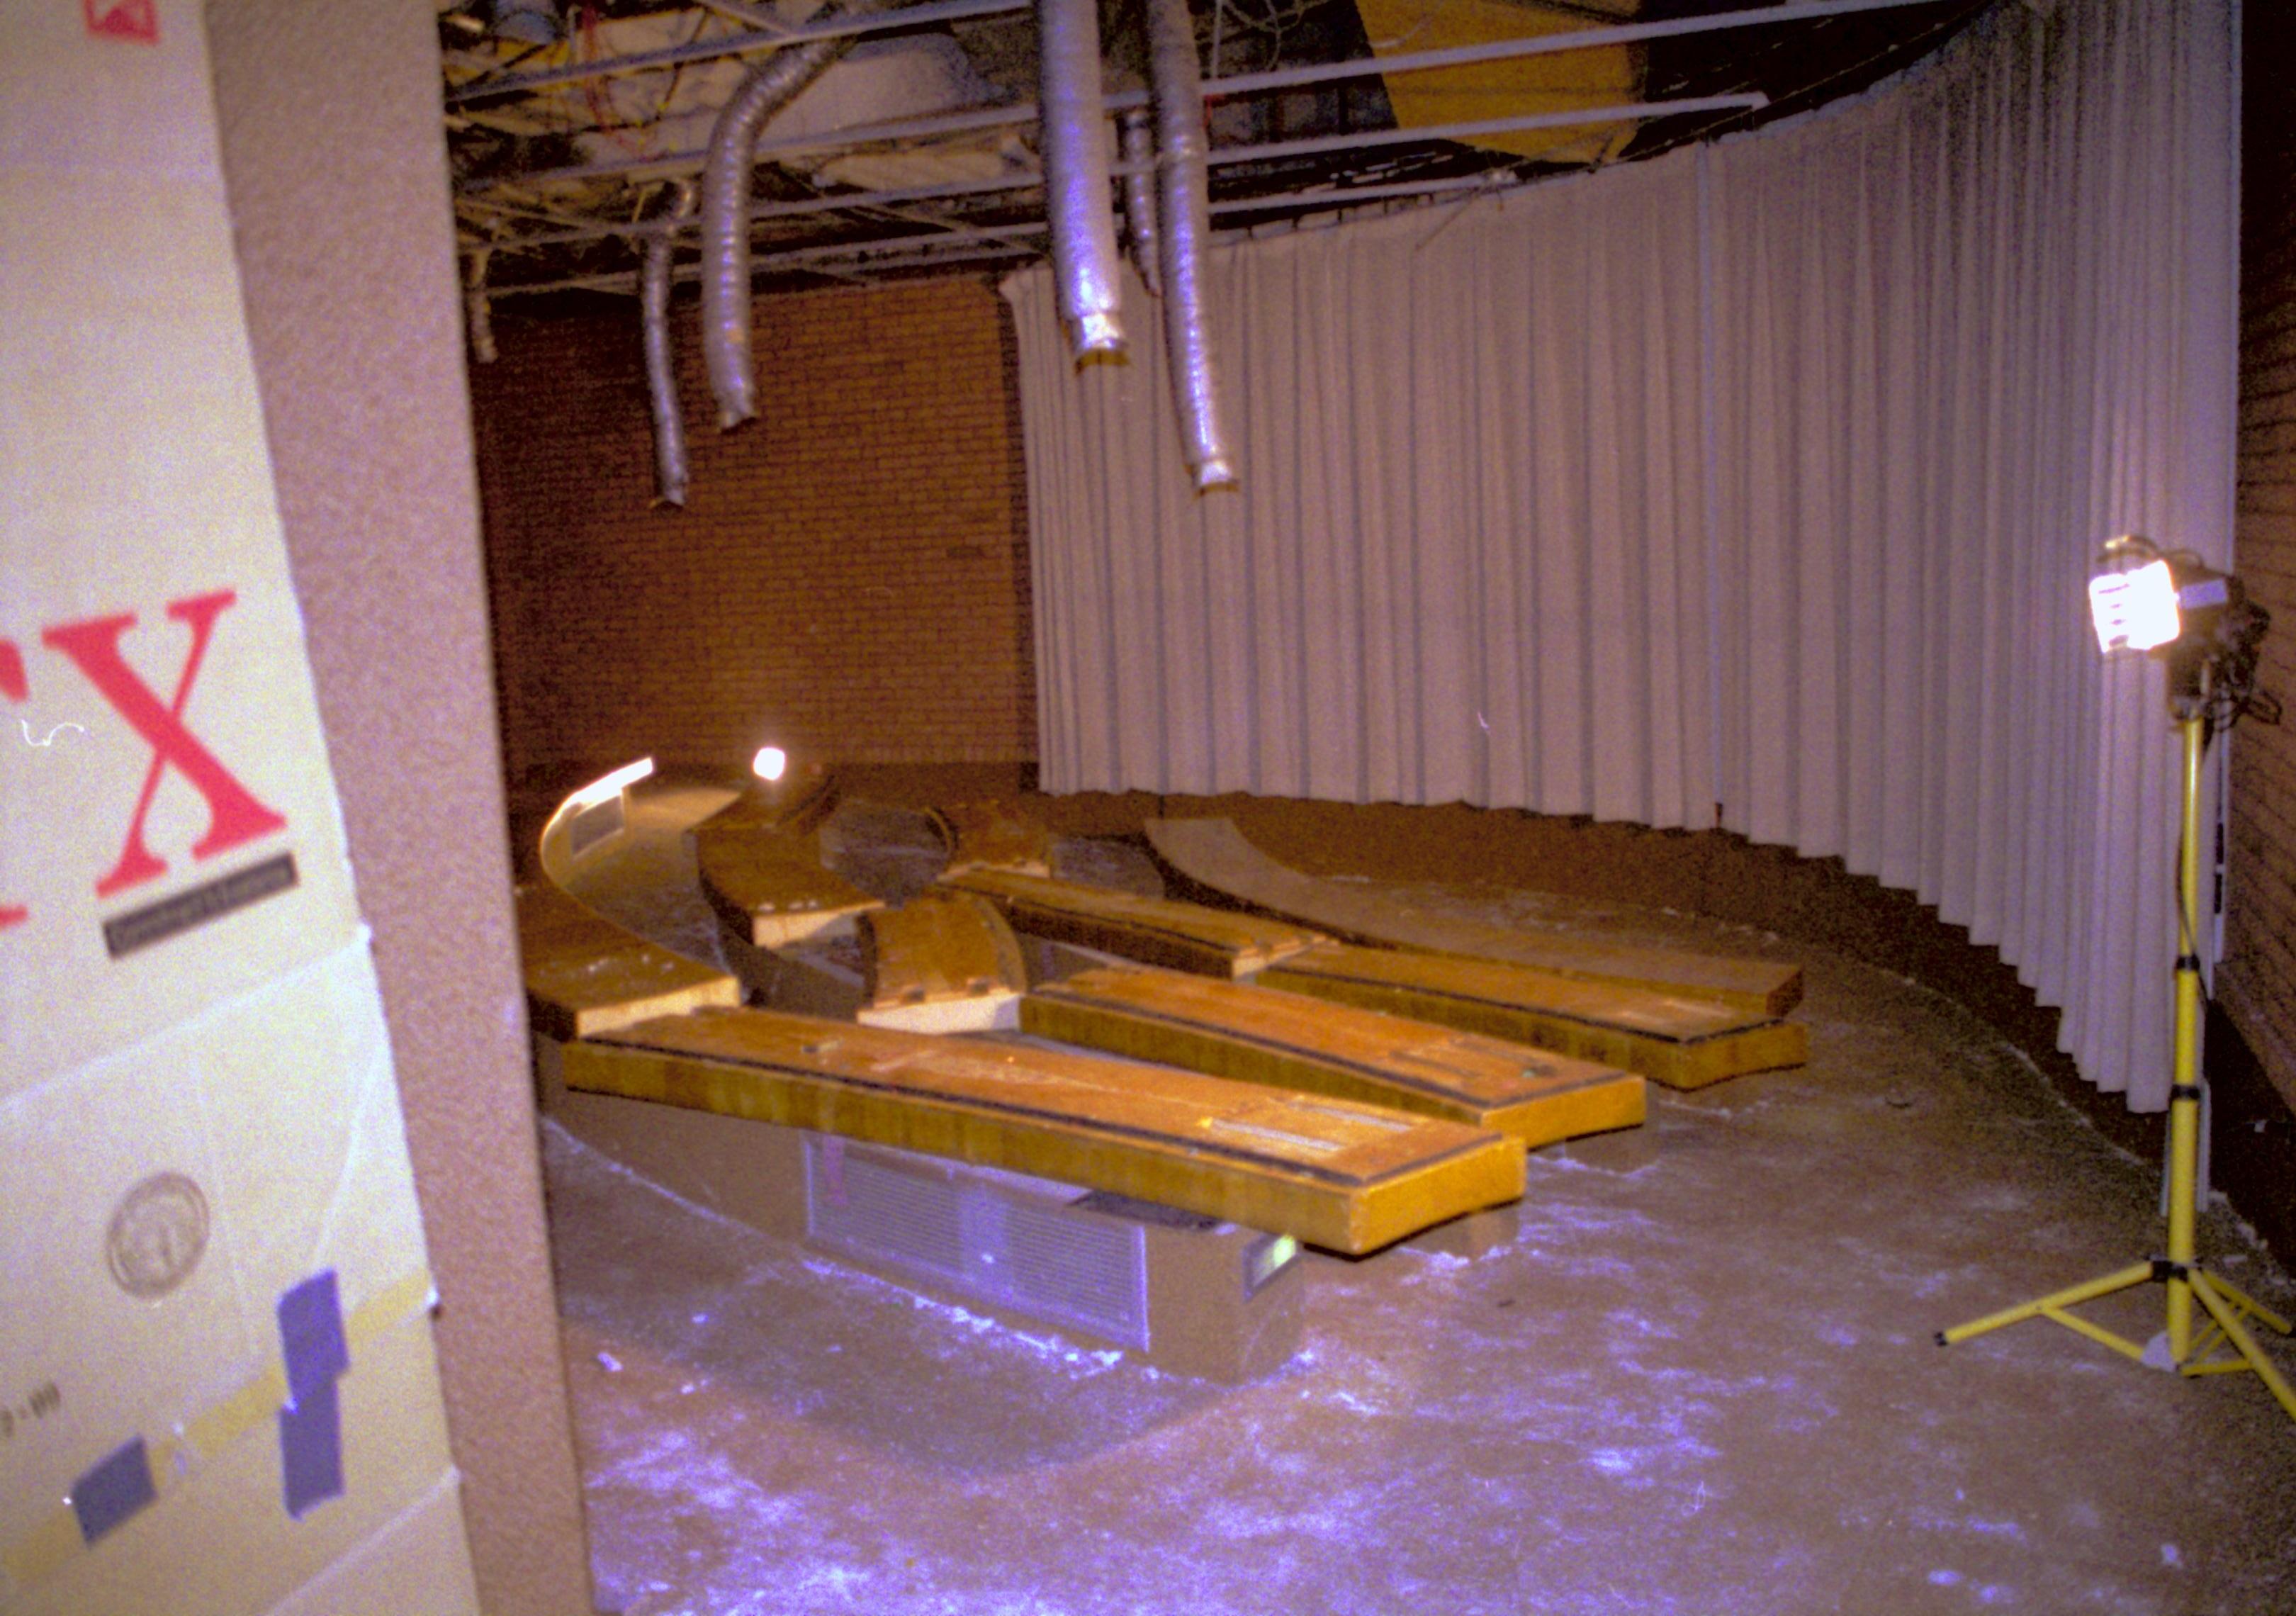 Theater 2 Lincoln Home NHS- Visitor Center remodel,  Roll 2000-8, exp 21 Visitor Center, remodel, theatre